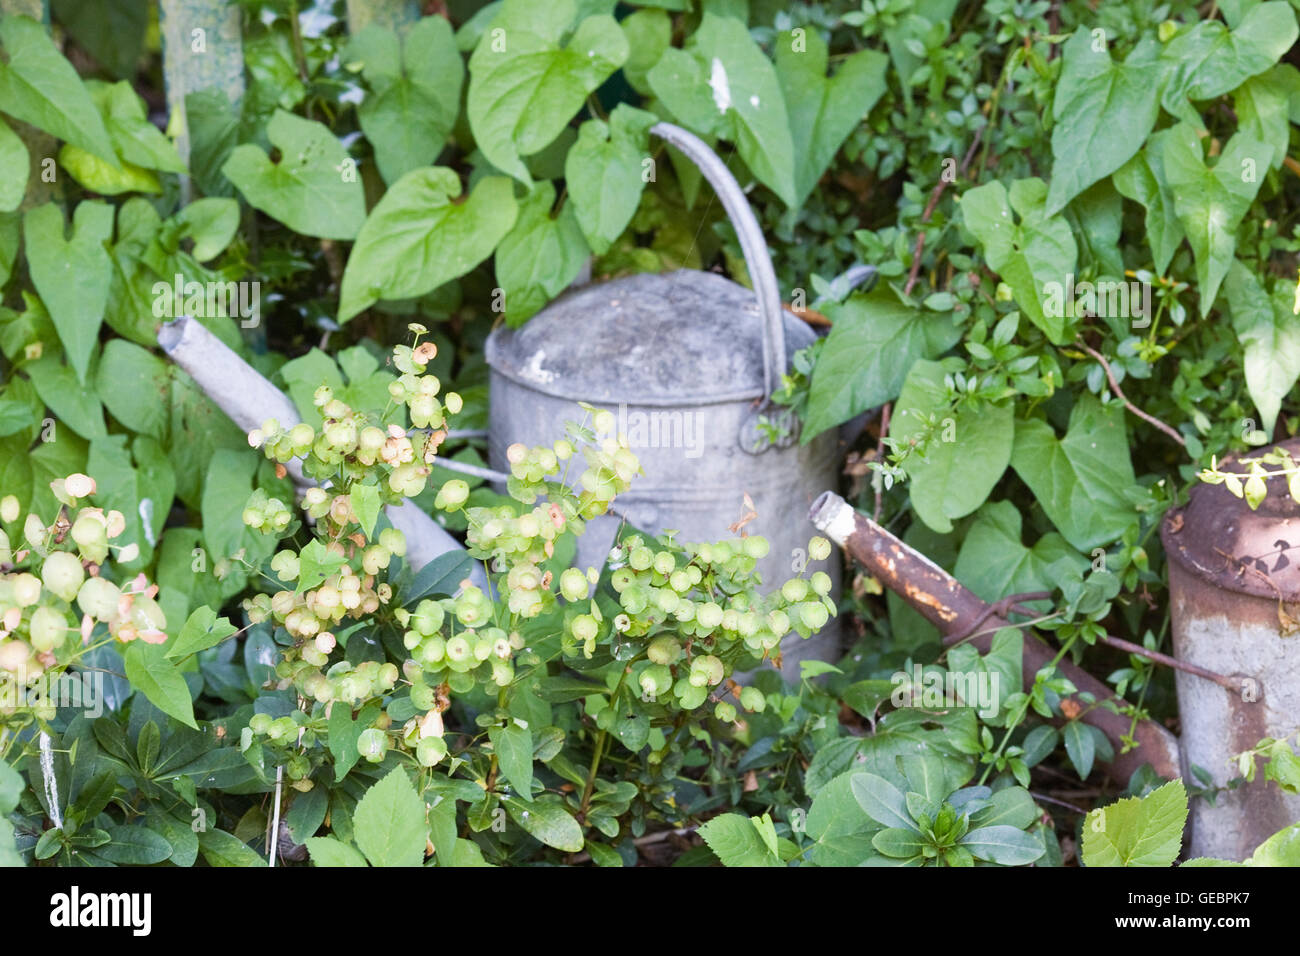 Watering cans in an overgrown border. Stock Photo